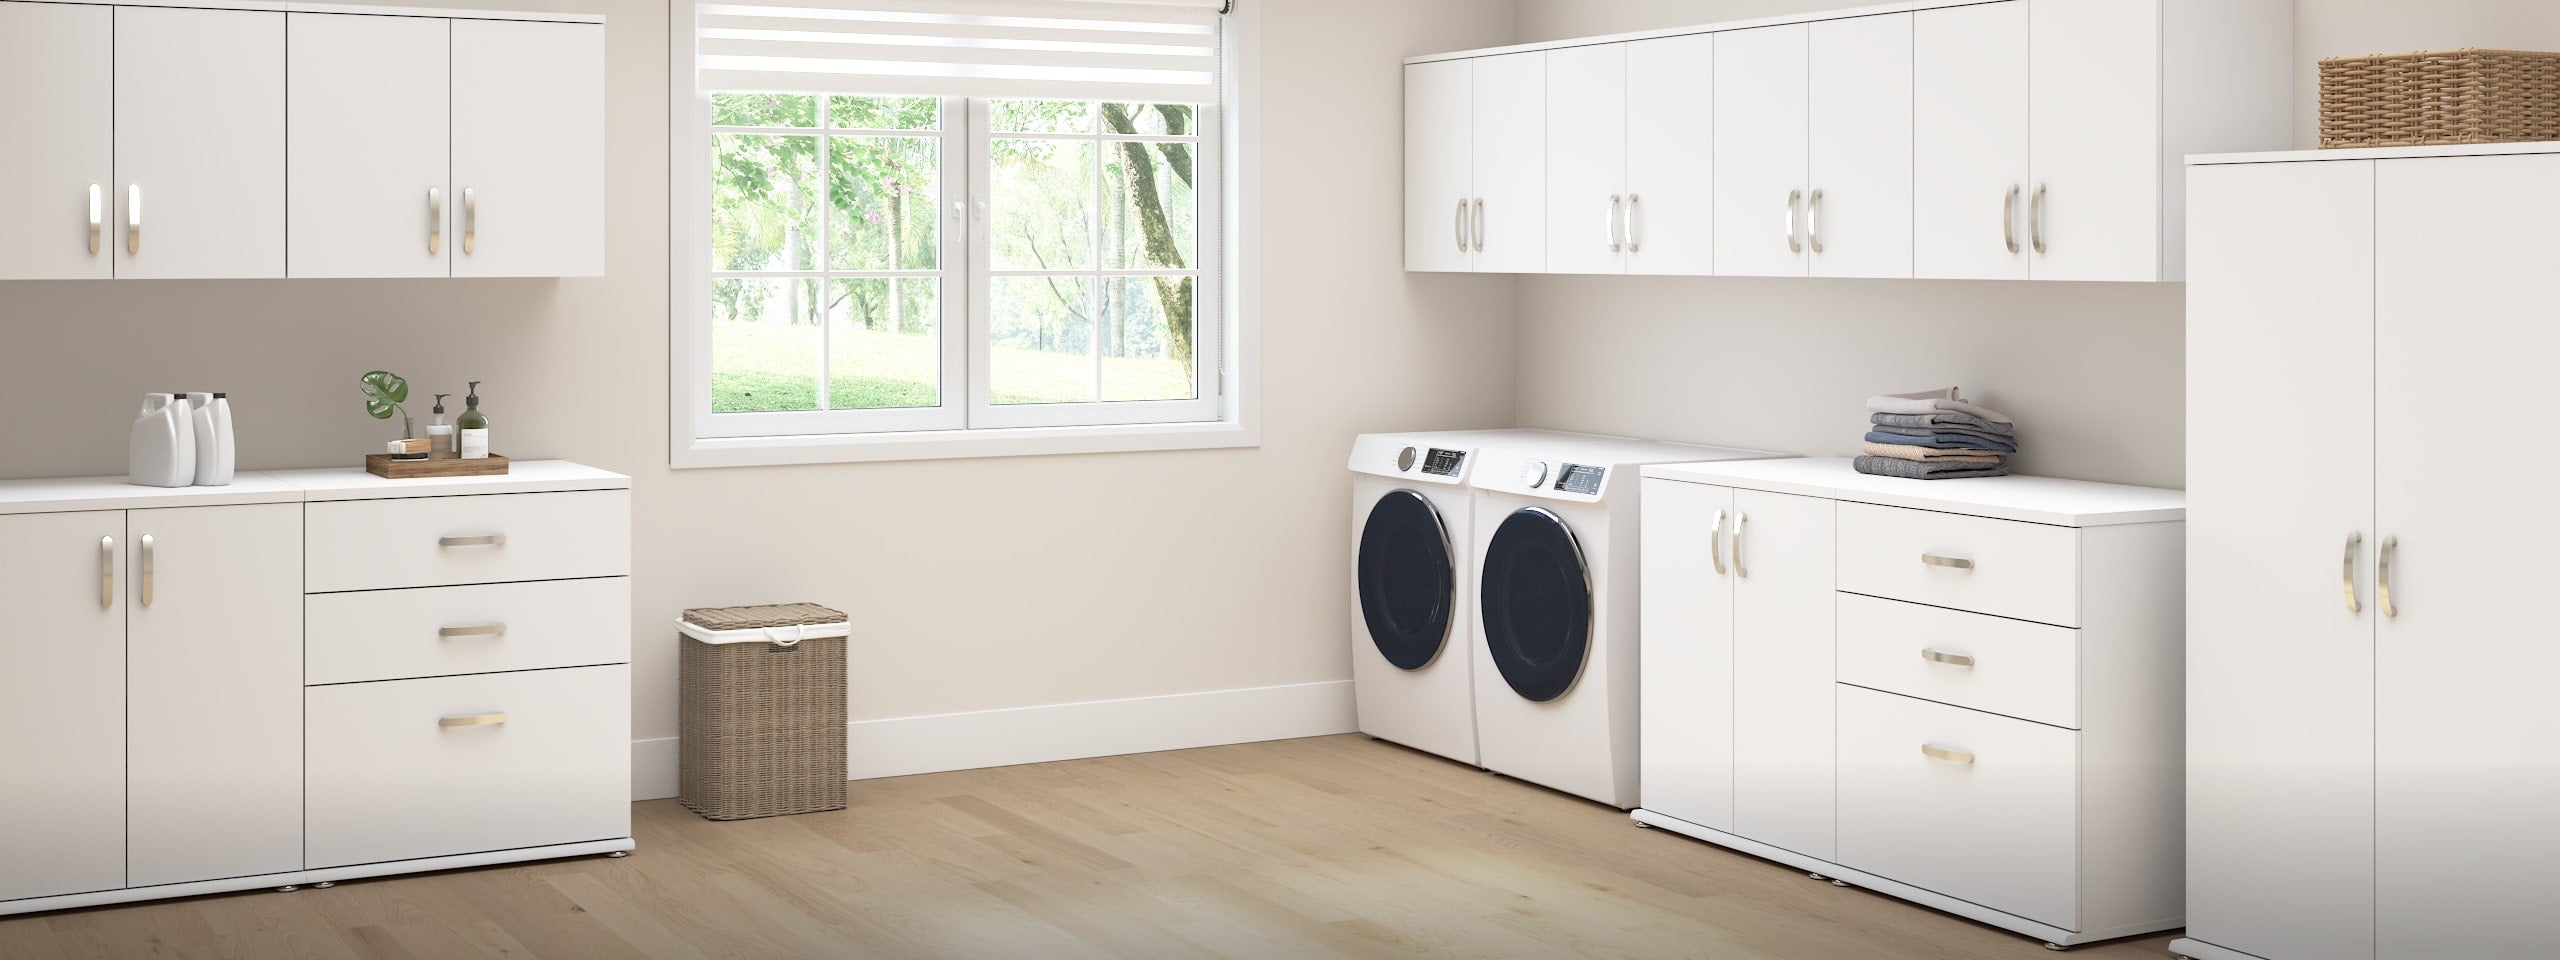 Laundry Room Cabinets & Cupboards